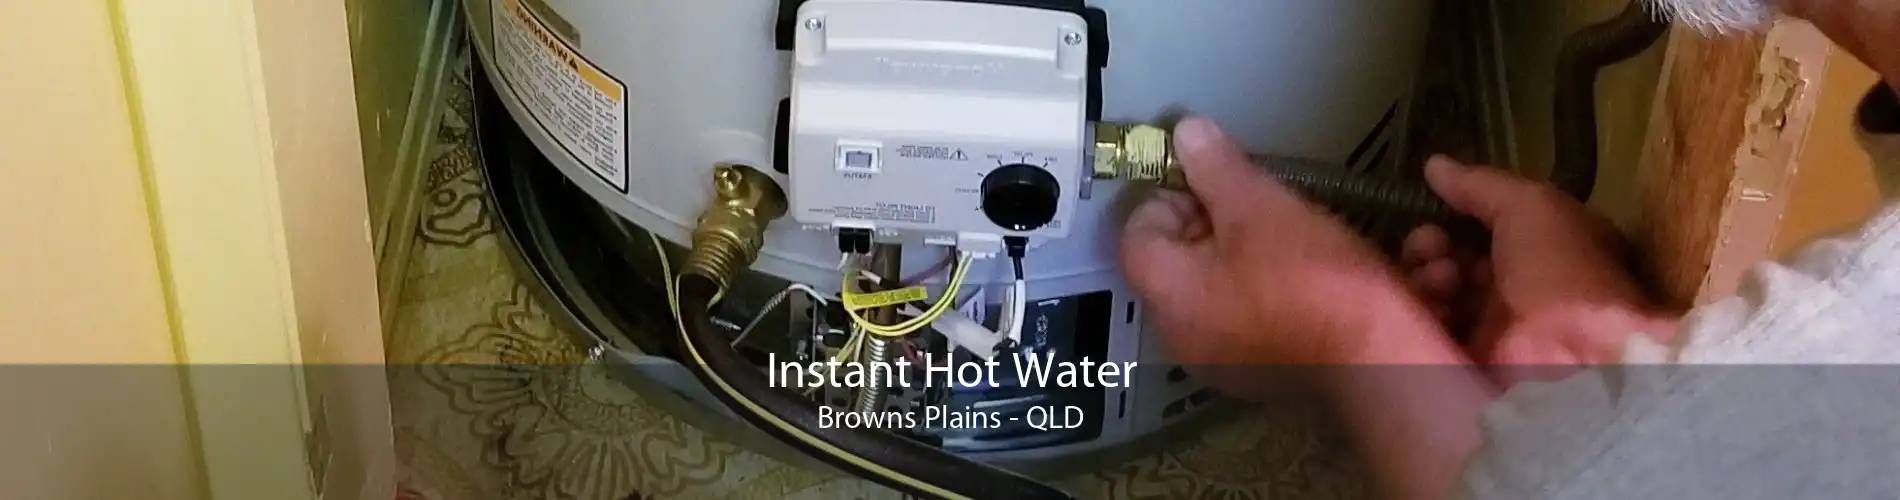 Instant Hot Water Browns Plains - QLD